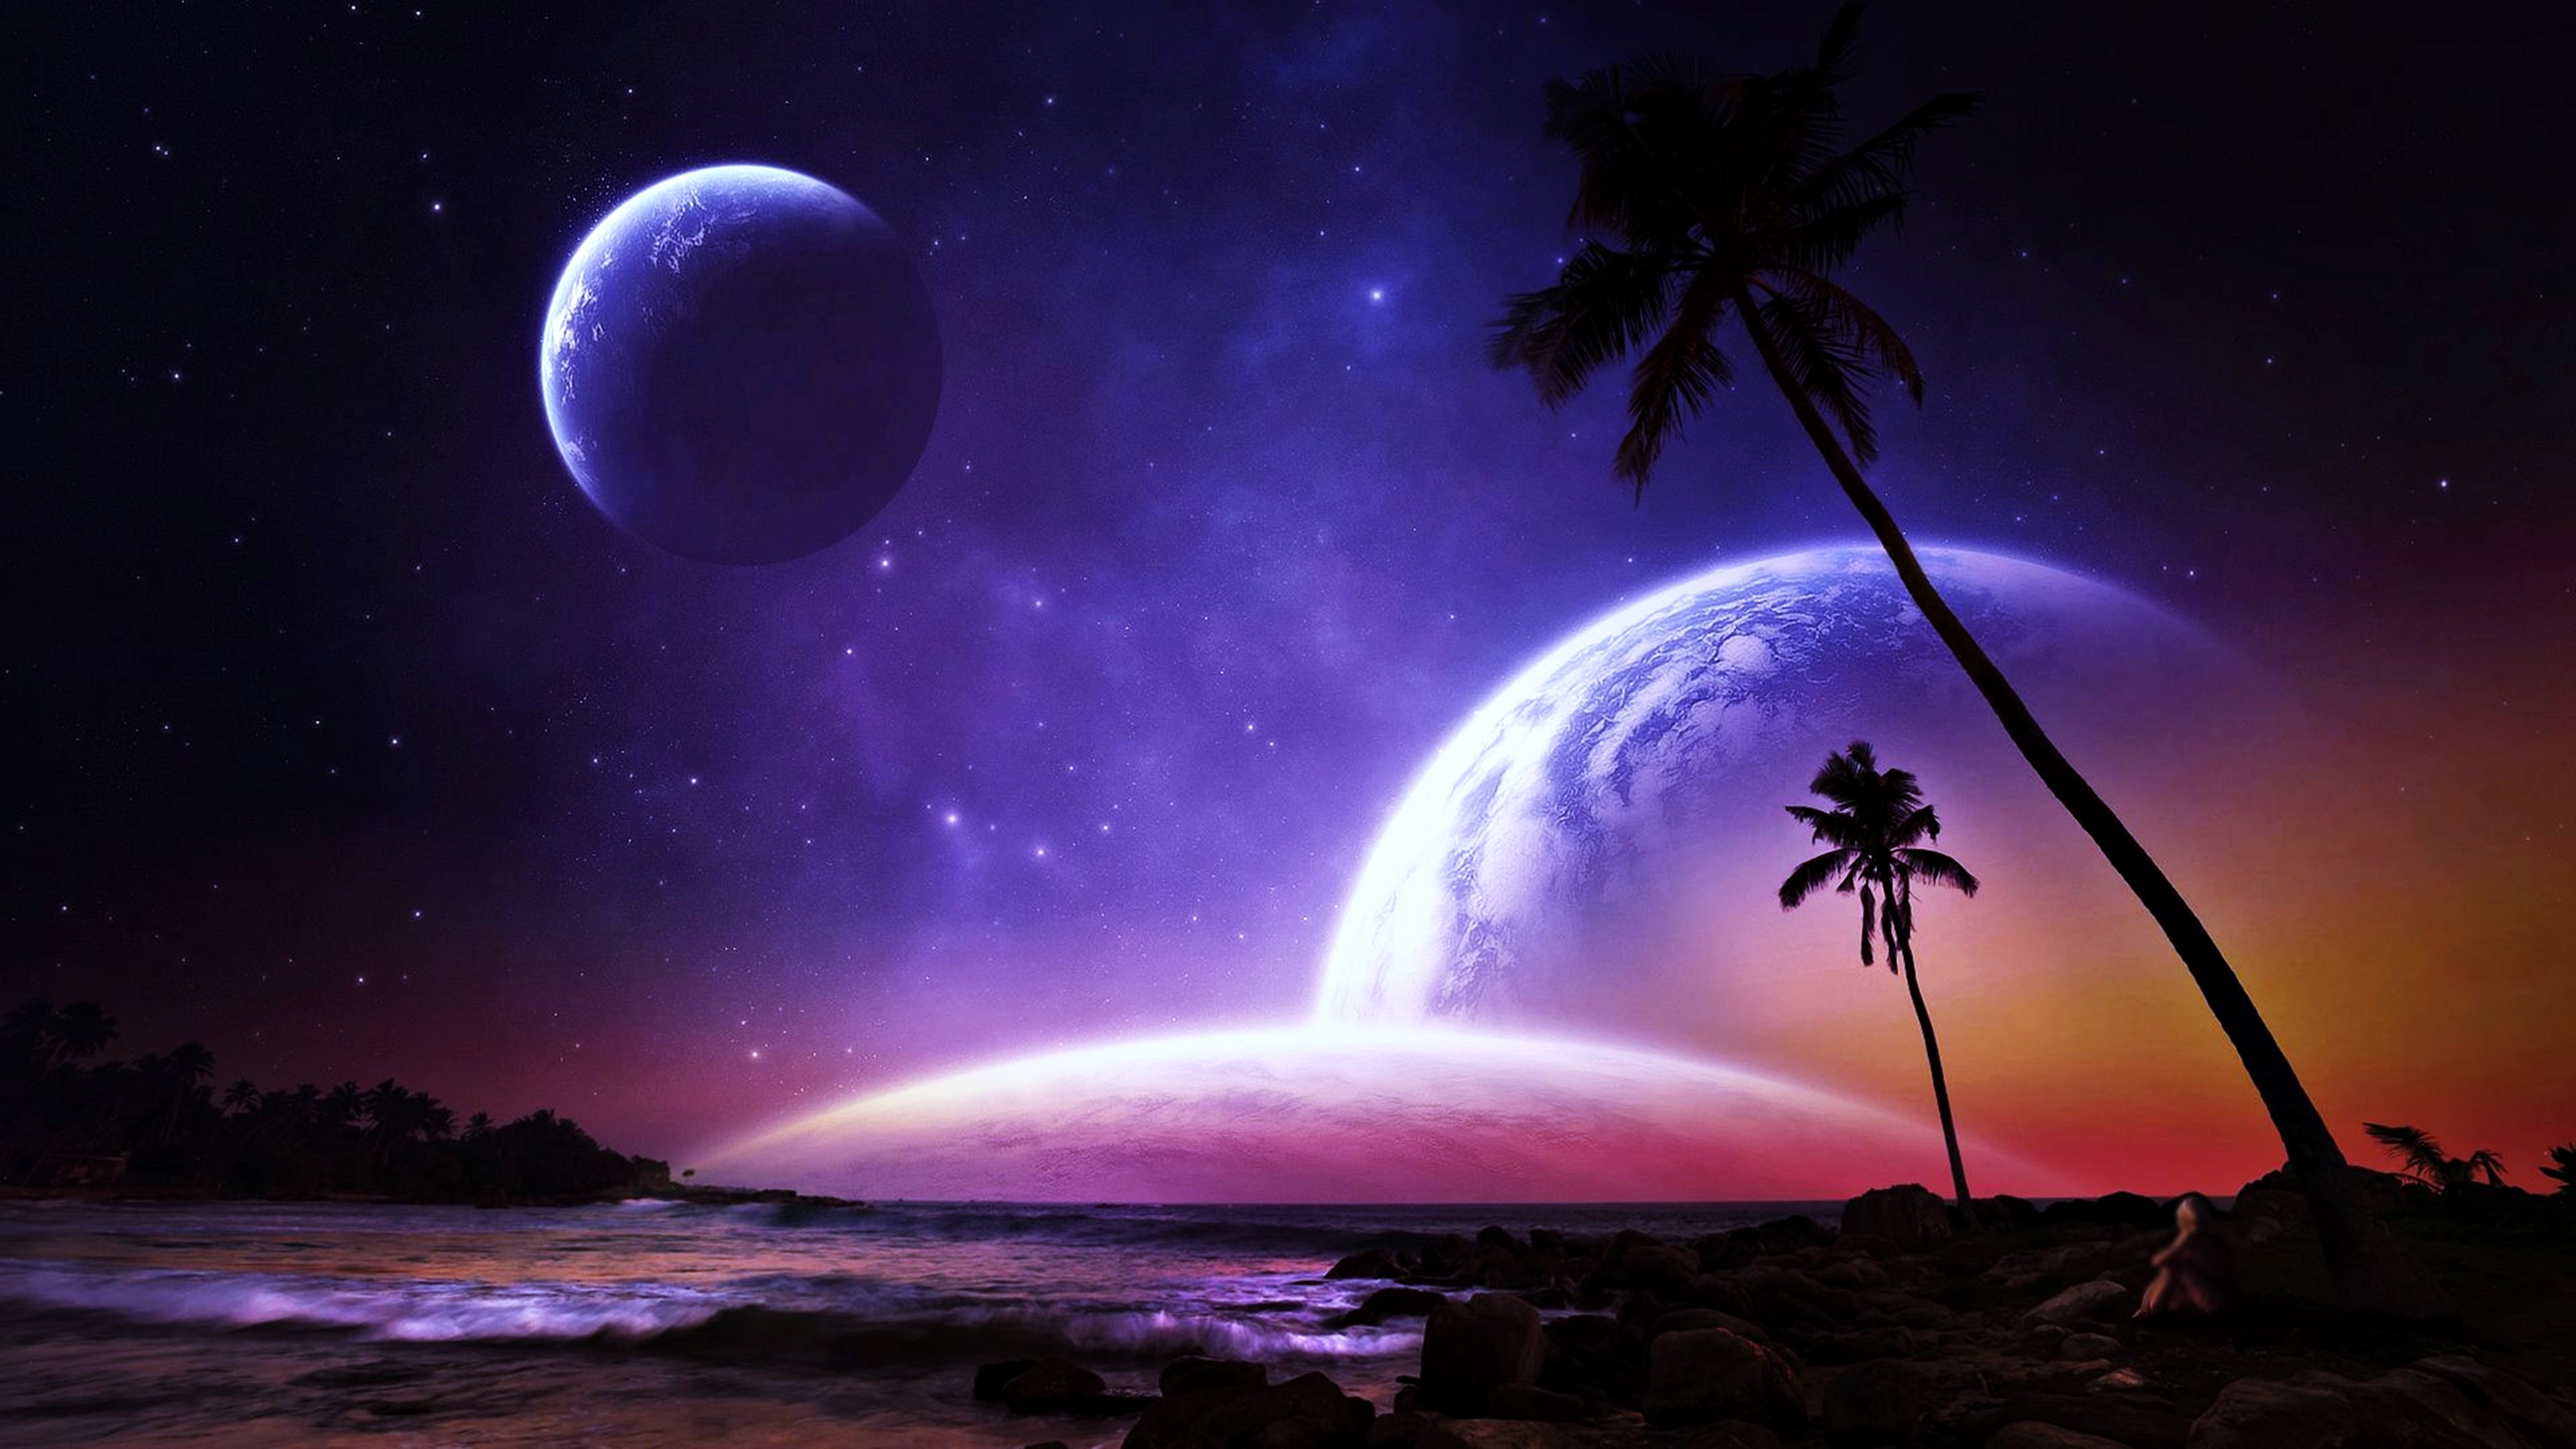 planets, Palms, Fantasy, Dreams, Colorful, Beaches, Space, Stars